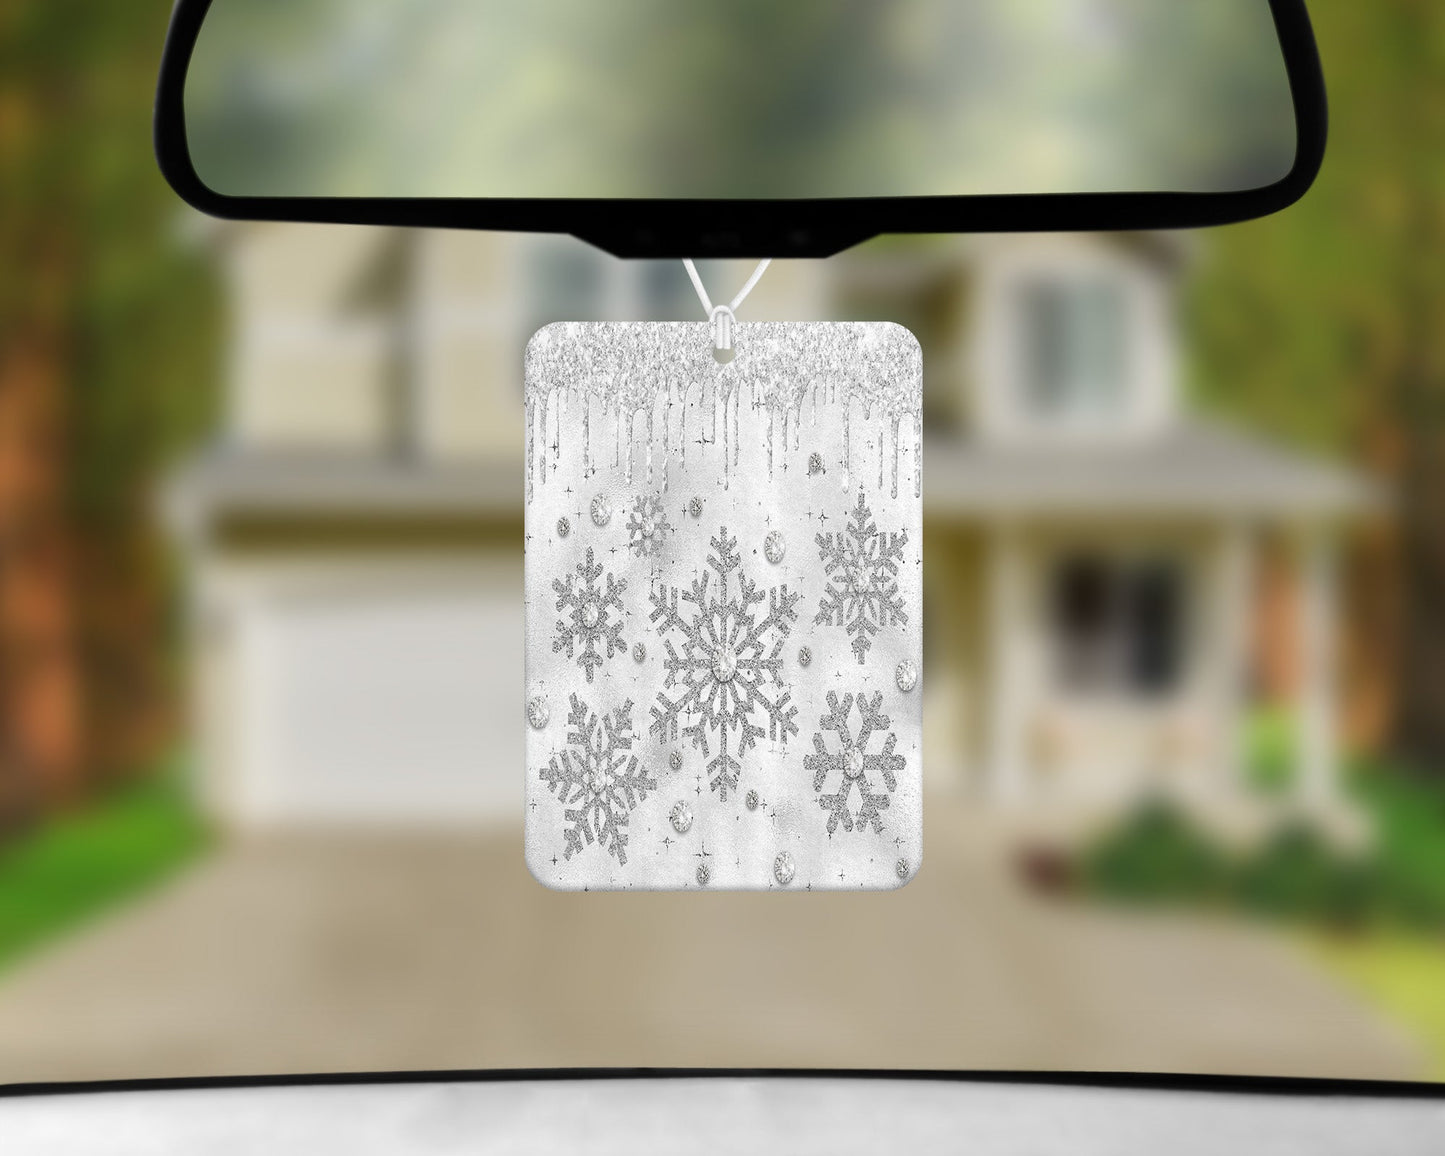 Snow Flakes|Freshie|Includes Scent Bottle - Vehicle Air Freshener